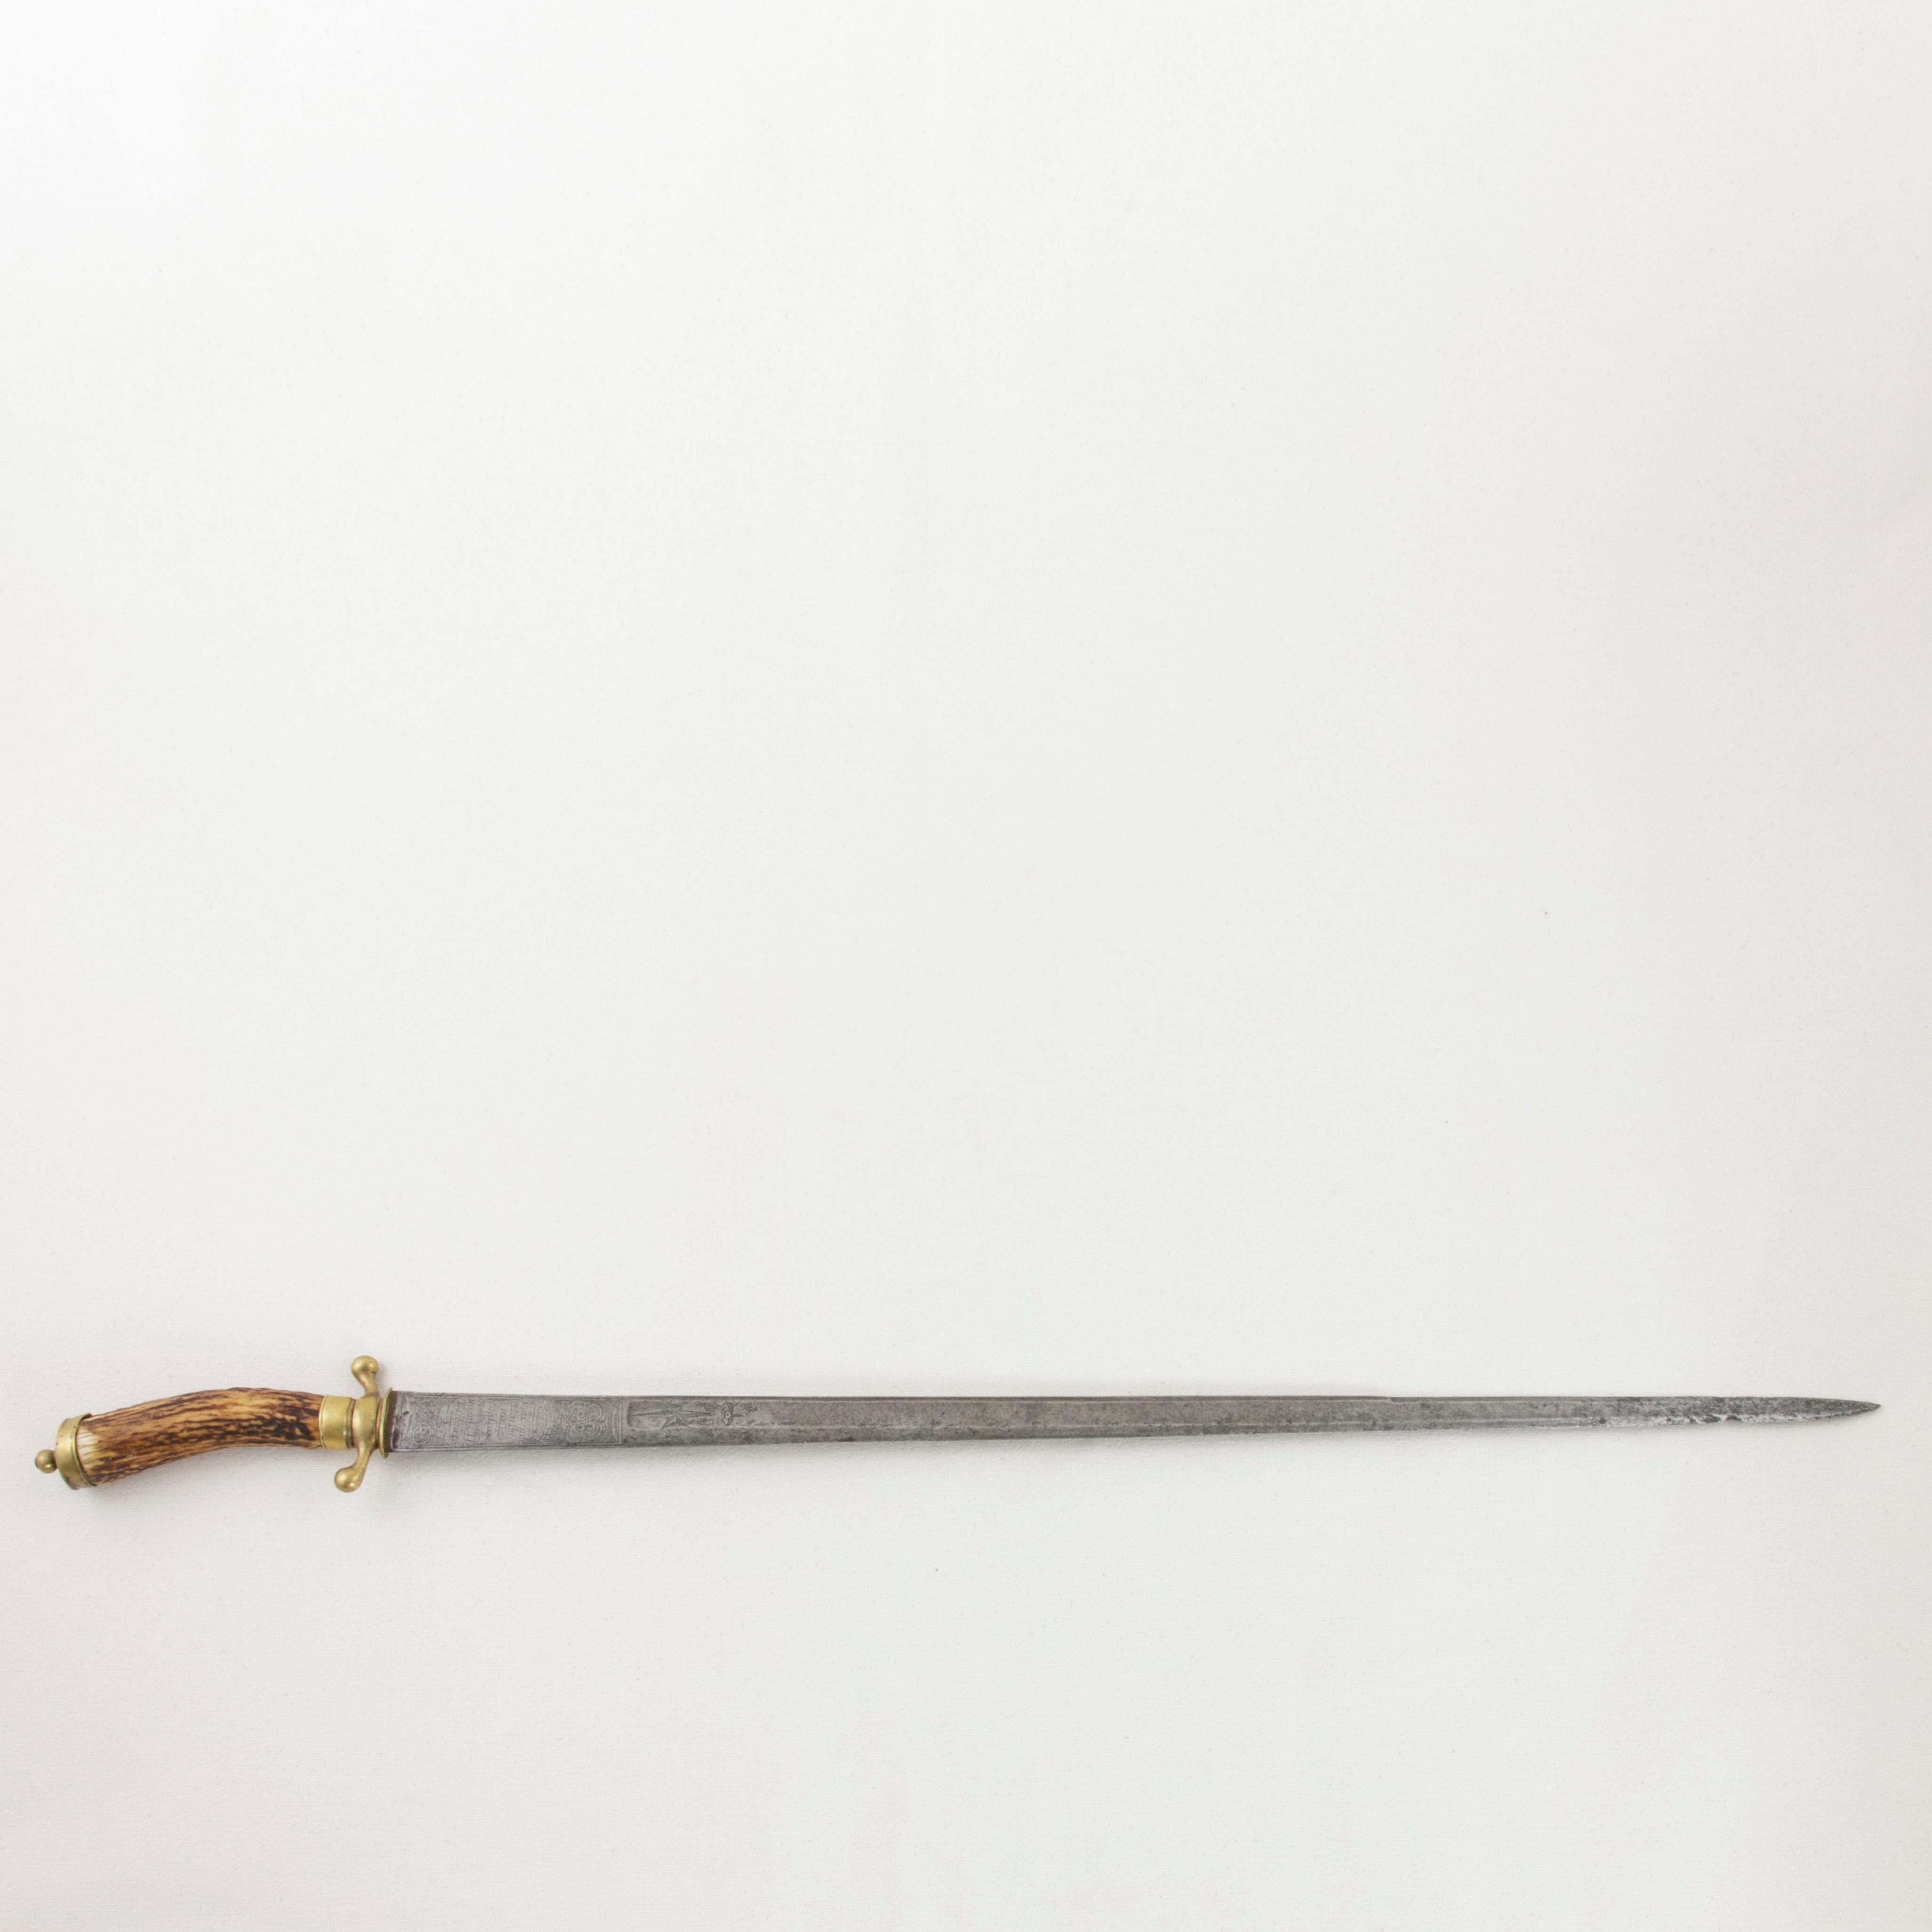 This mid-18th century French Louis XV period hunting short sword features a 26 inch long tapered steel blade engraved with a crown and star on each side indicating that this piece once belonged to a noble. An engraved hunting scene with a wild boar